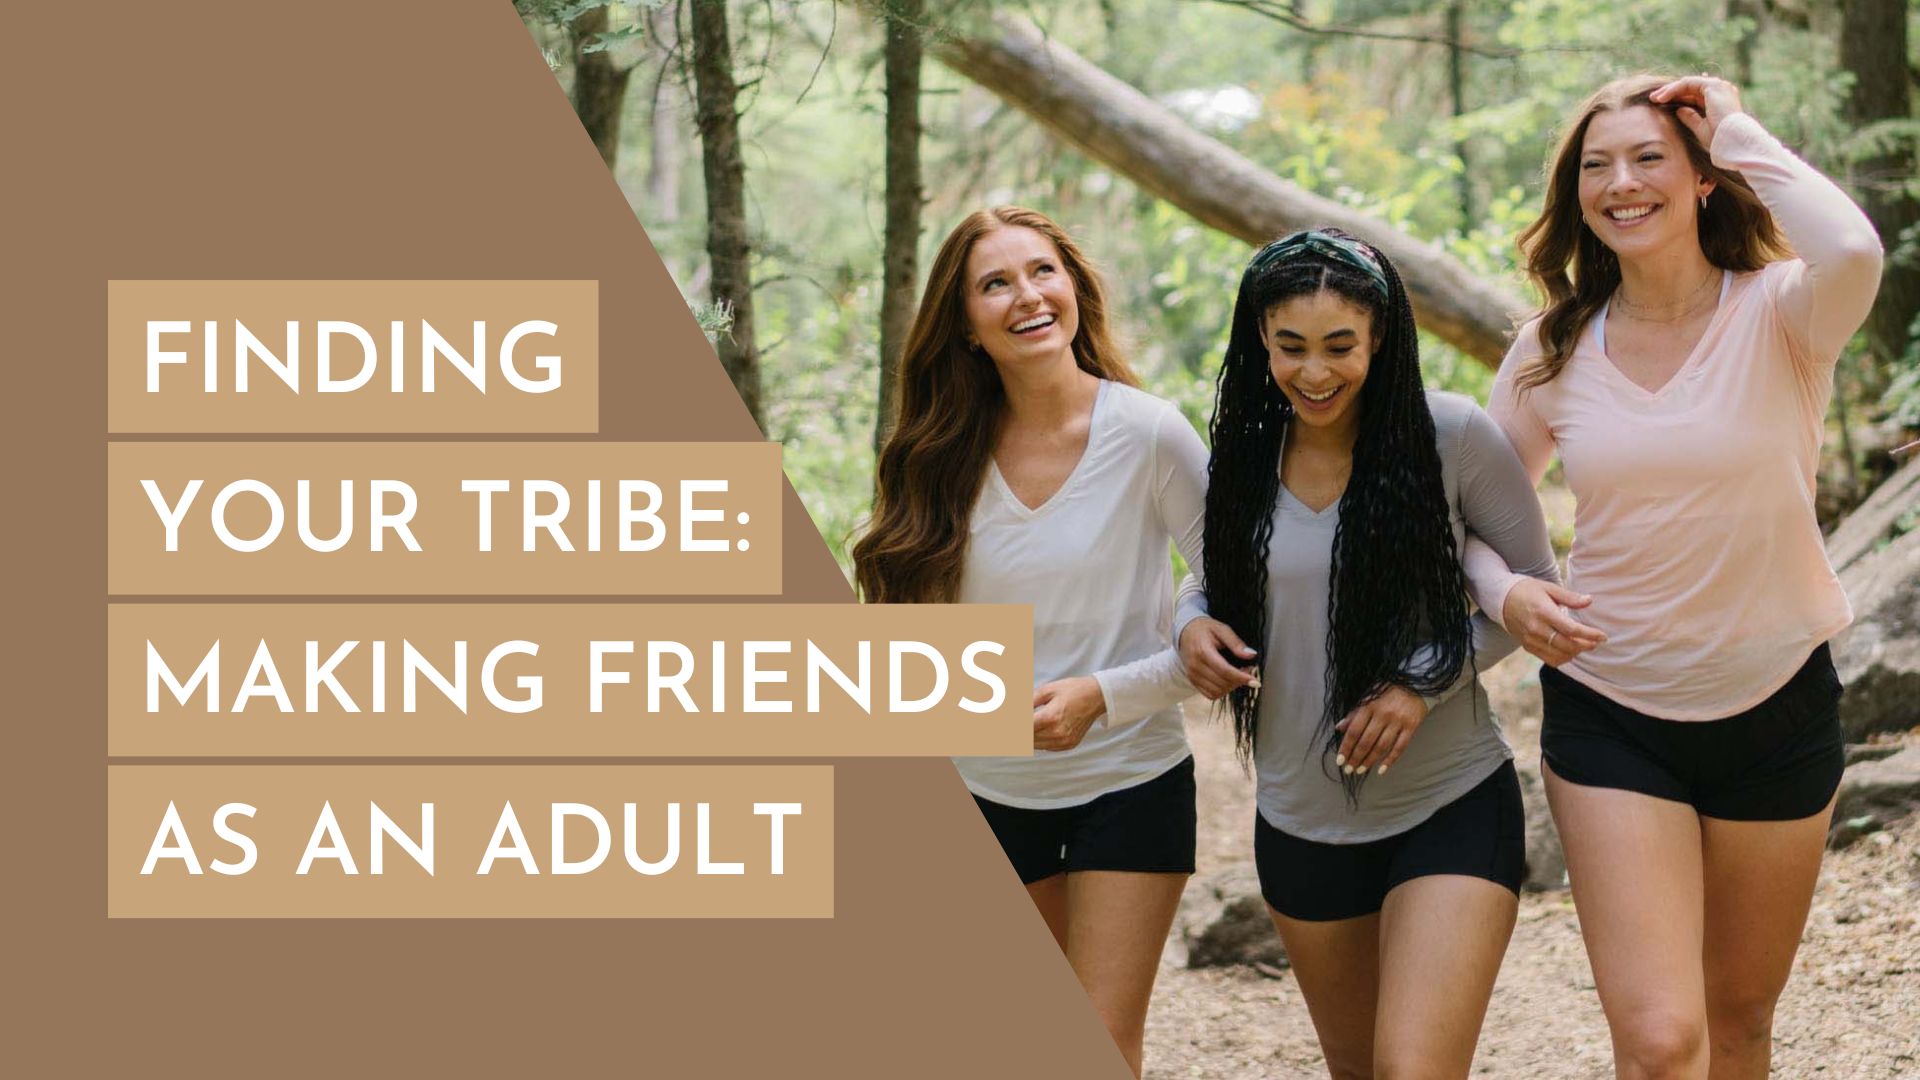 Finding Your Tribe: Making Friends as an Adult - Zyia Active